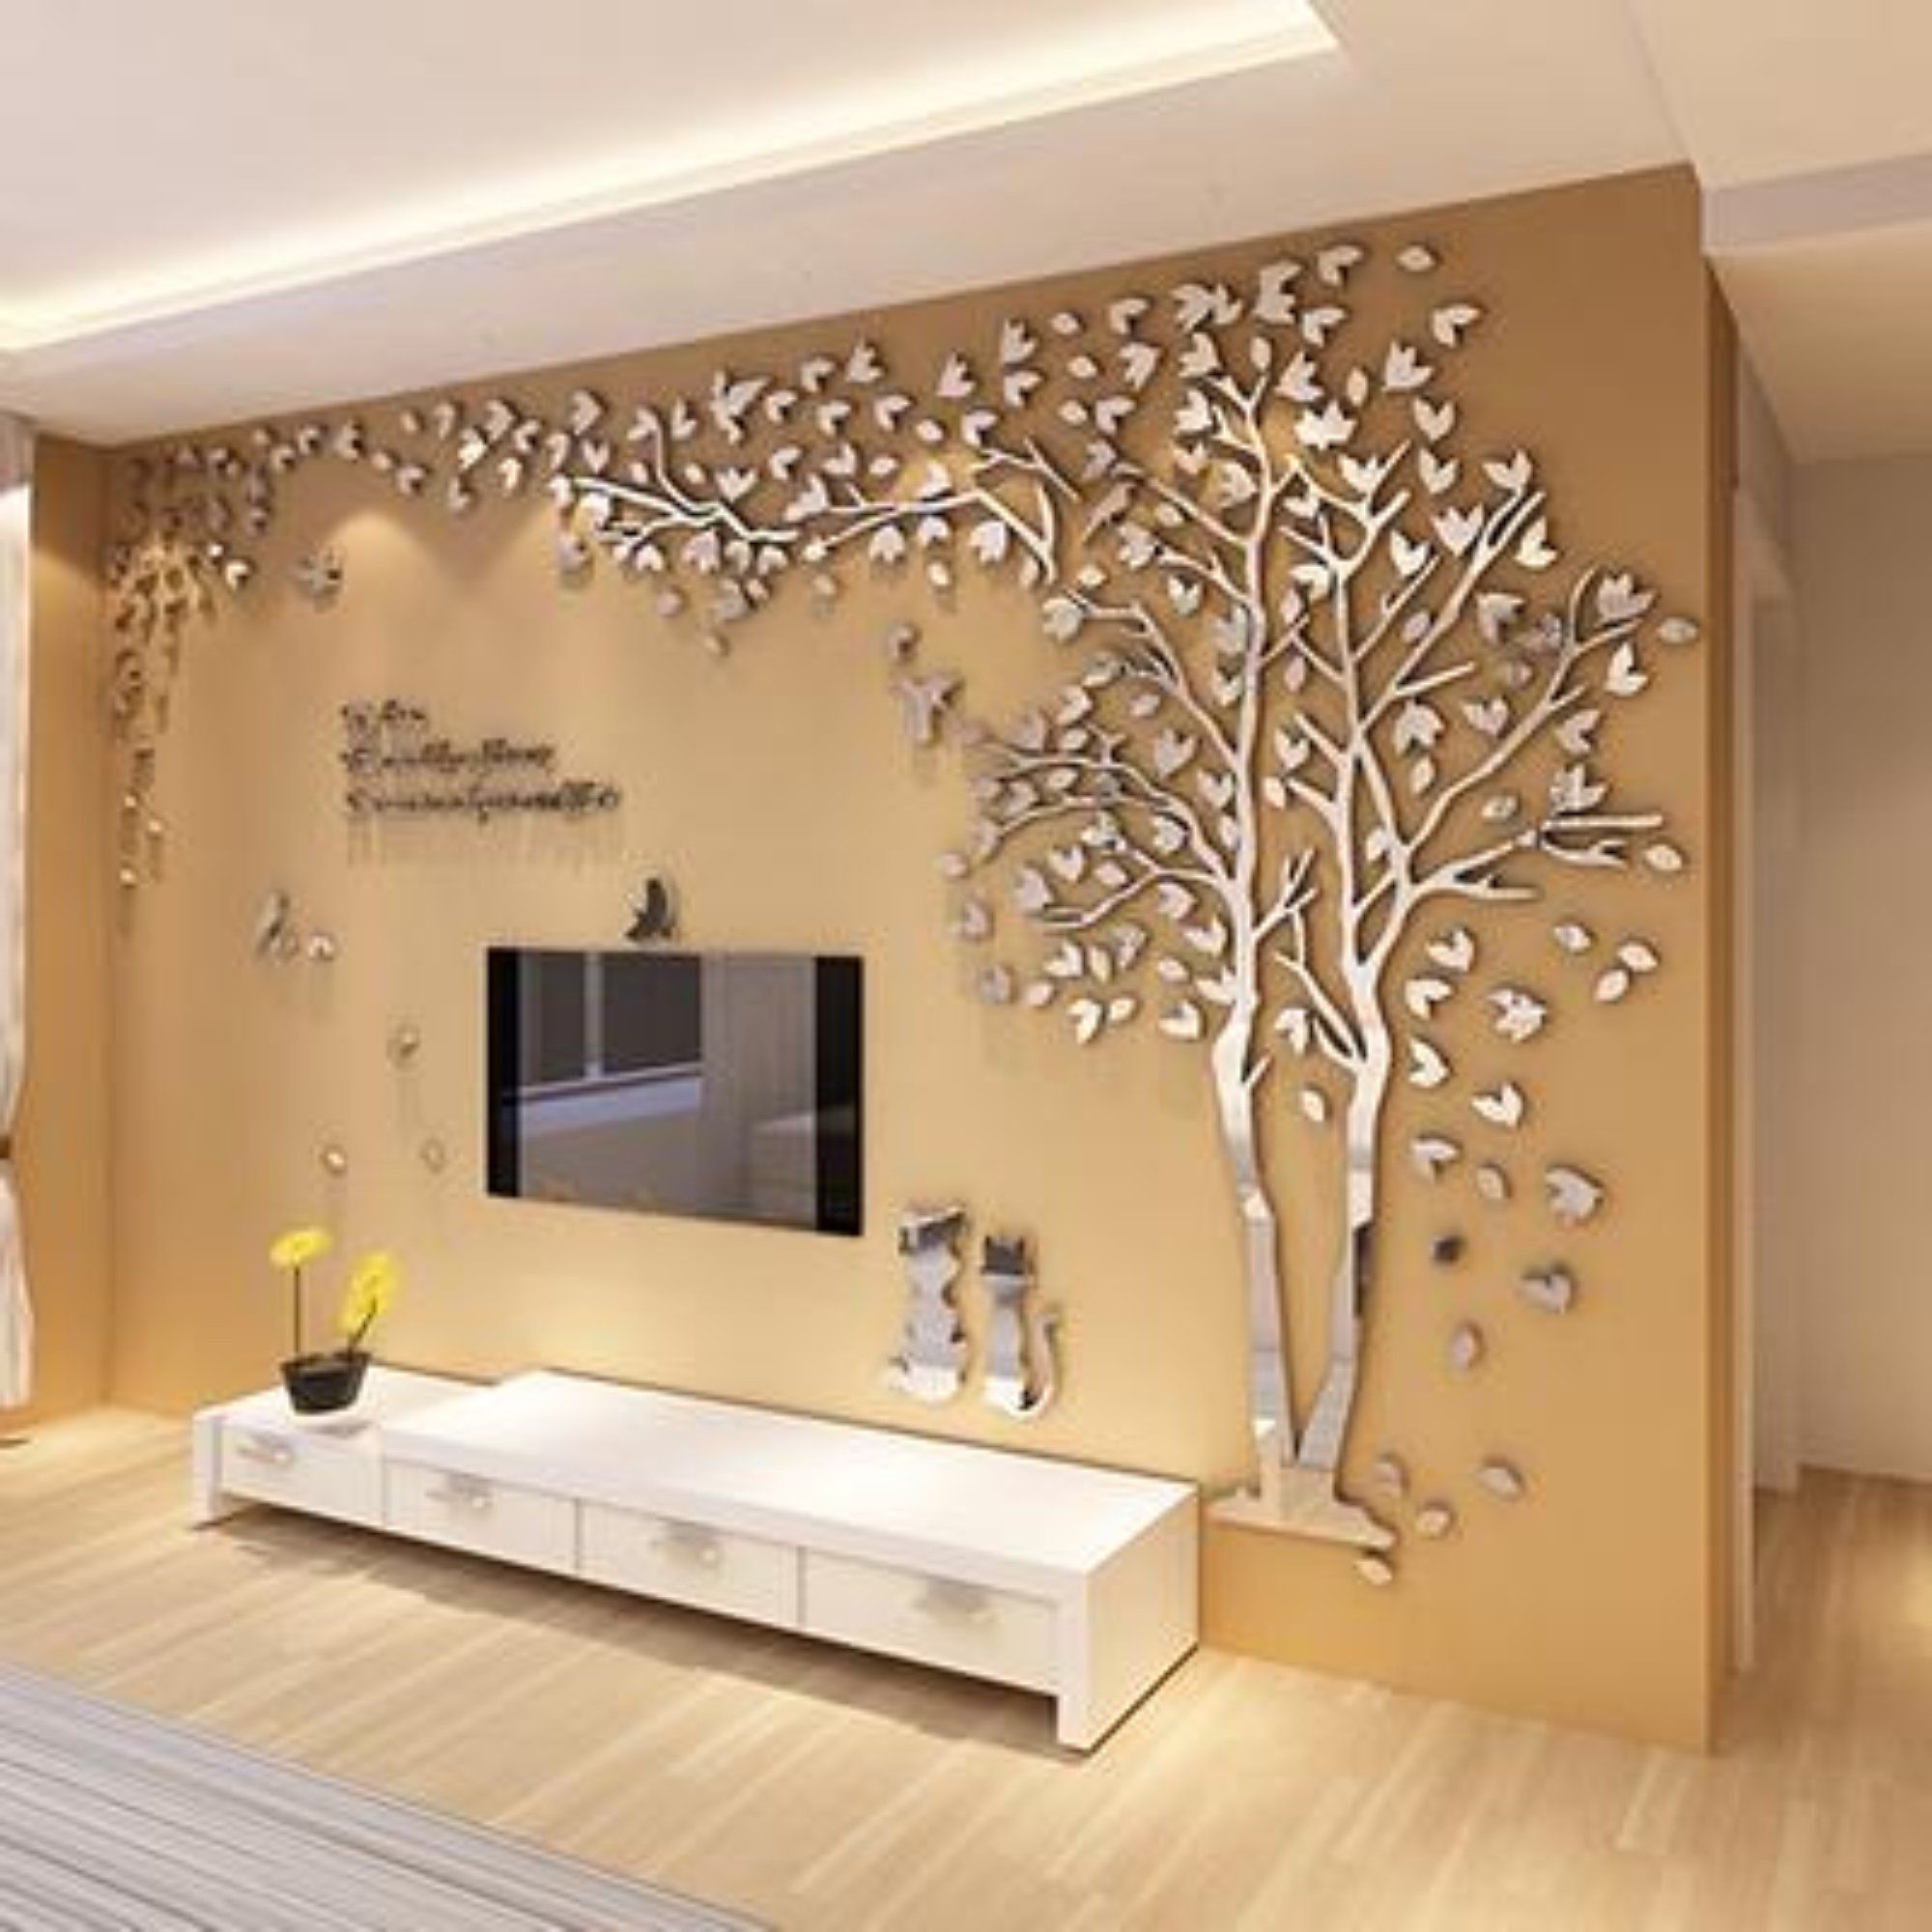 20+ Wall Stickers For Living Room - MAGZHOUSE